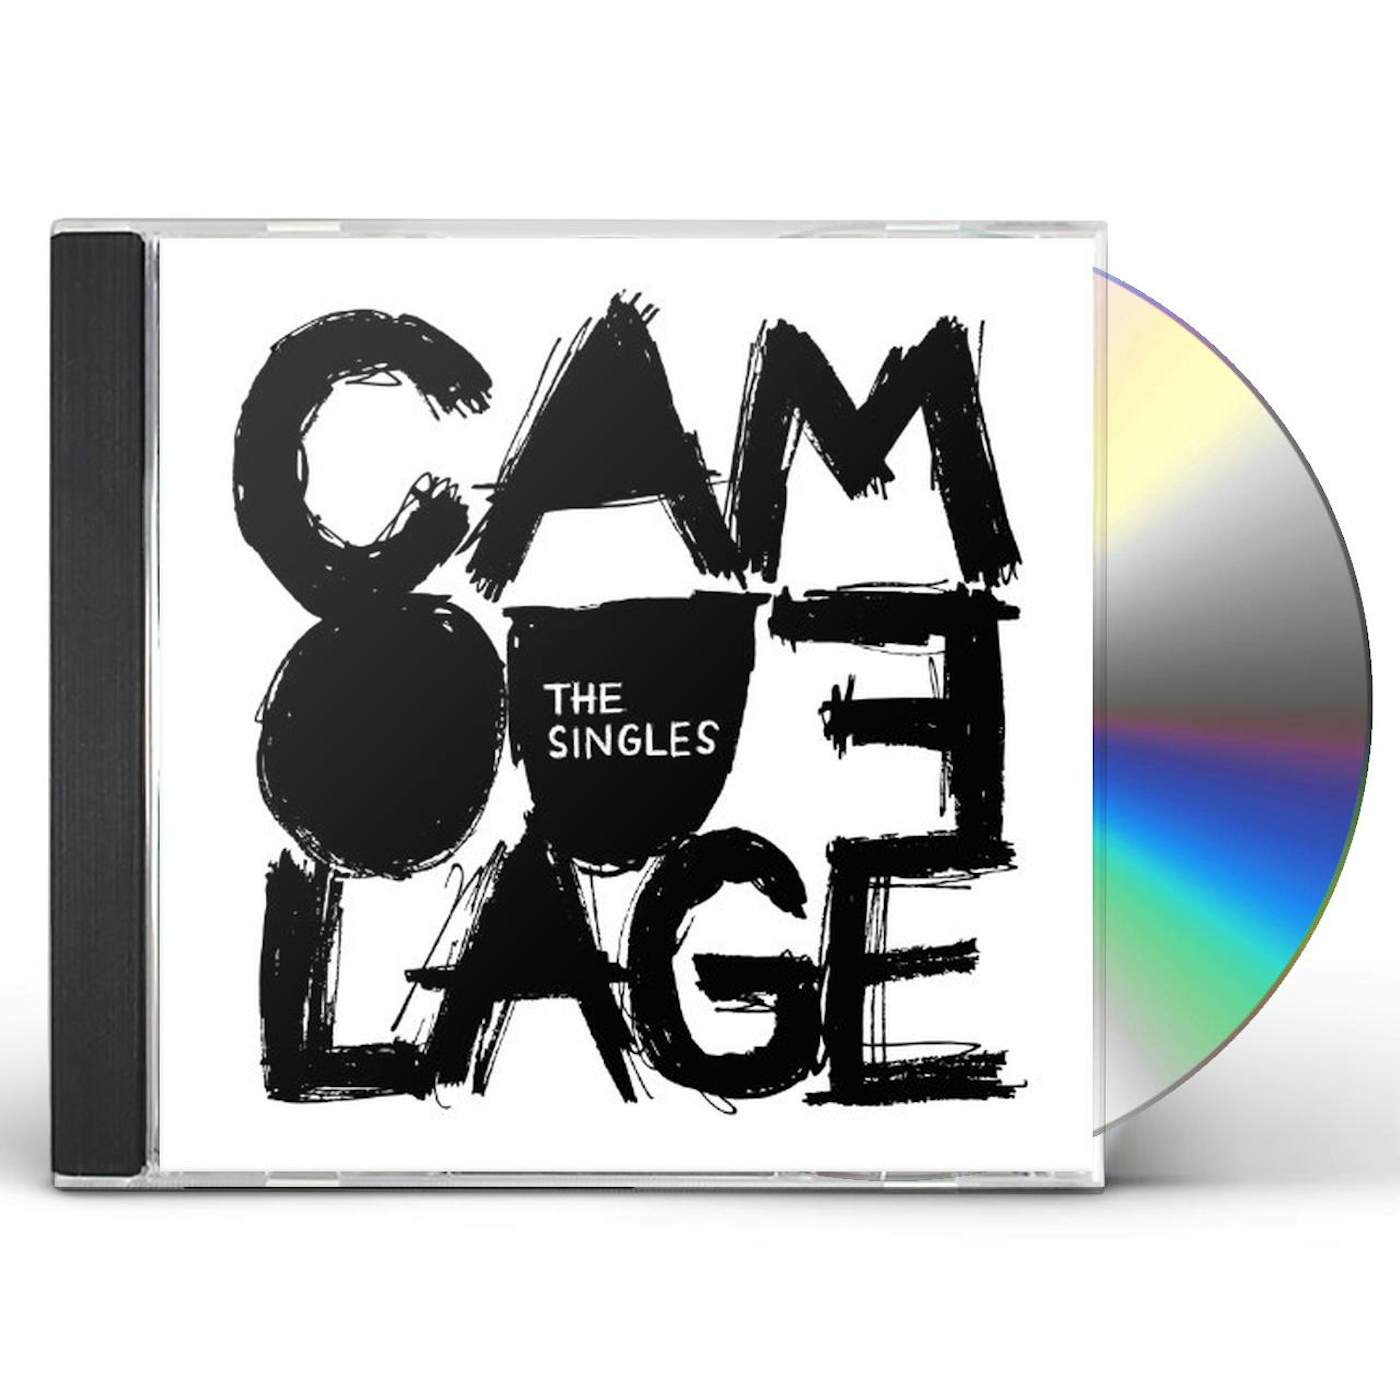 Camouflage SINGLES CD